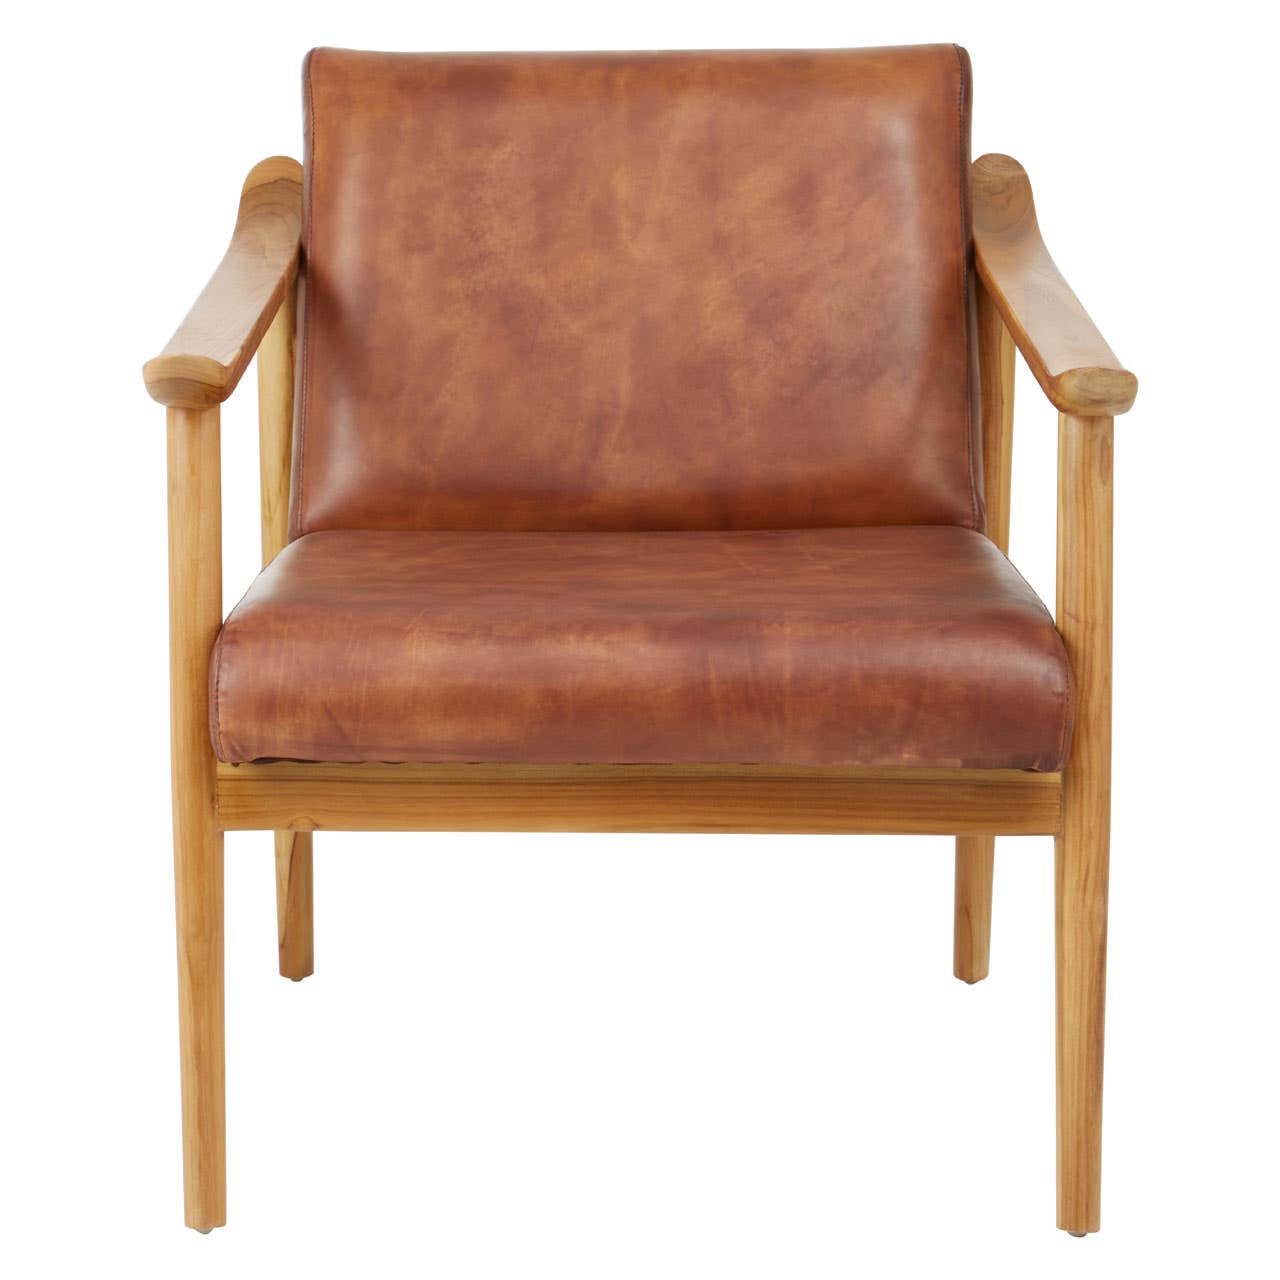 Kendari Chair With Brown Plain Cow Leather